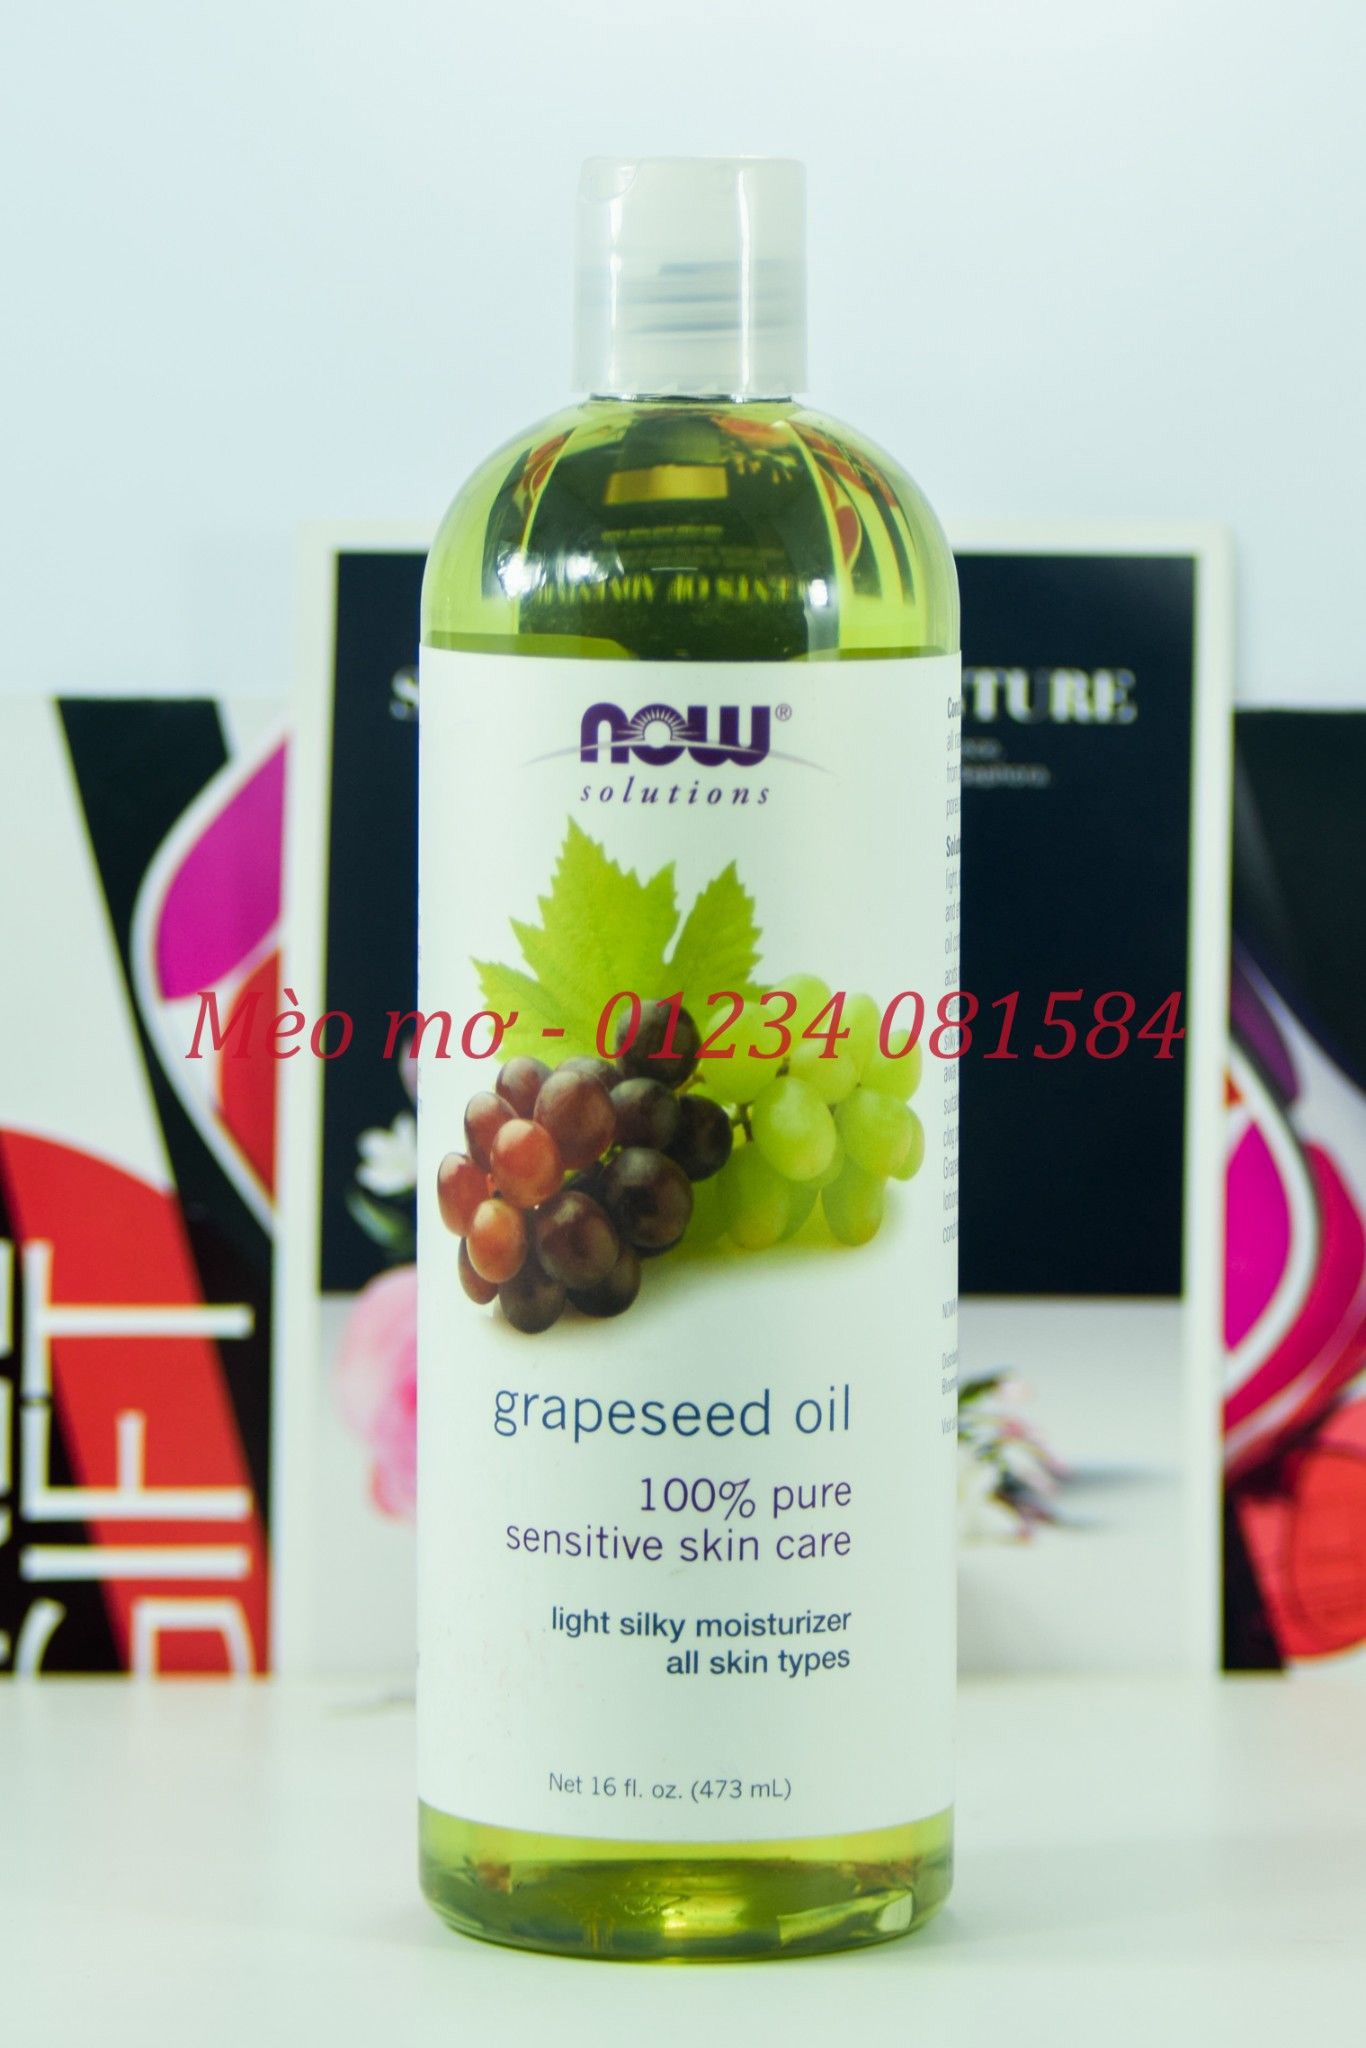 Now - grapeseed oil - 473ml